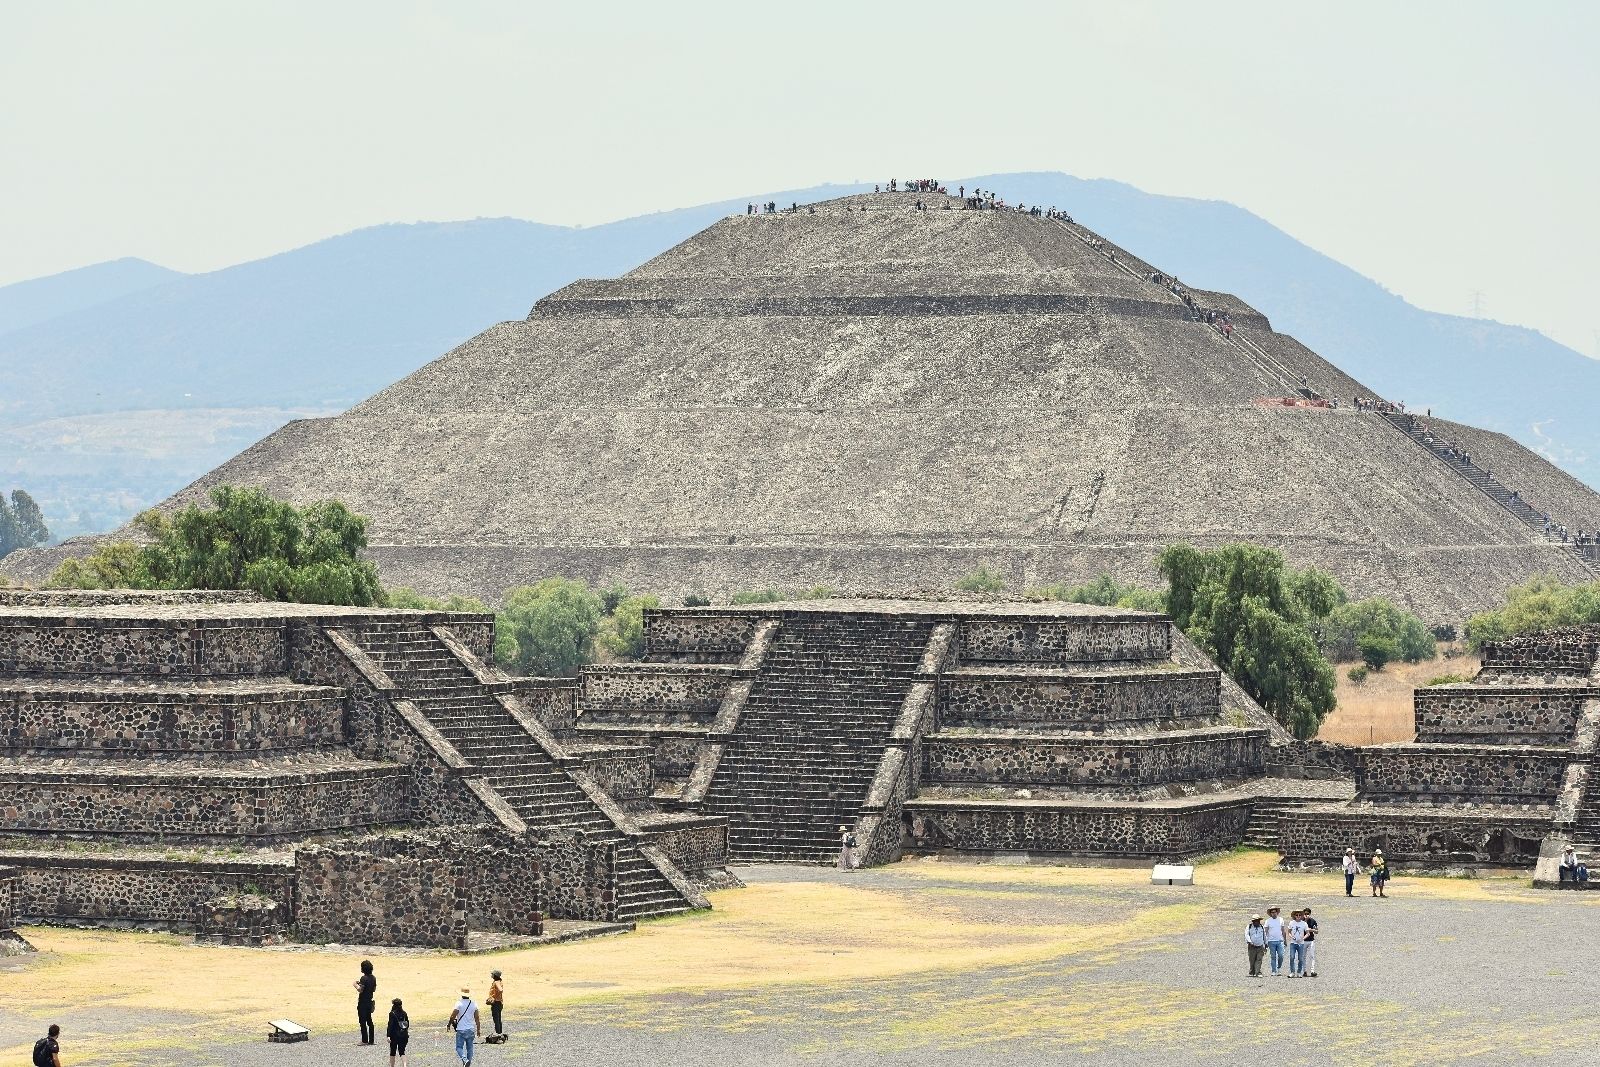 Tour # 1 in Mexico City: 3X1 Teotihuacan Pyramids plus...